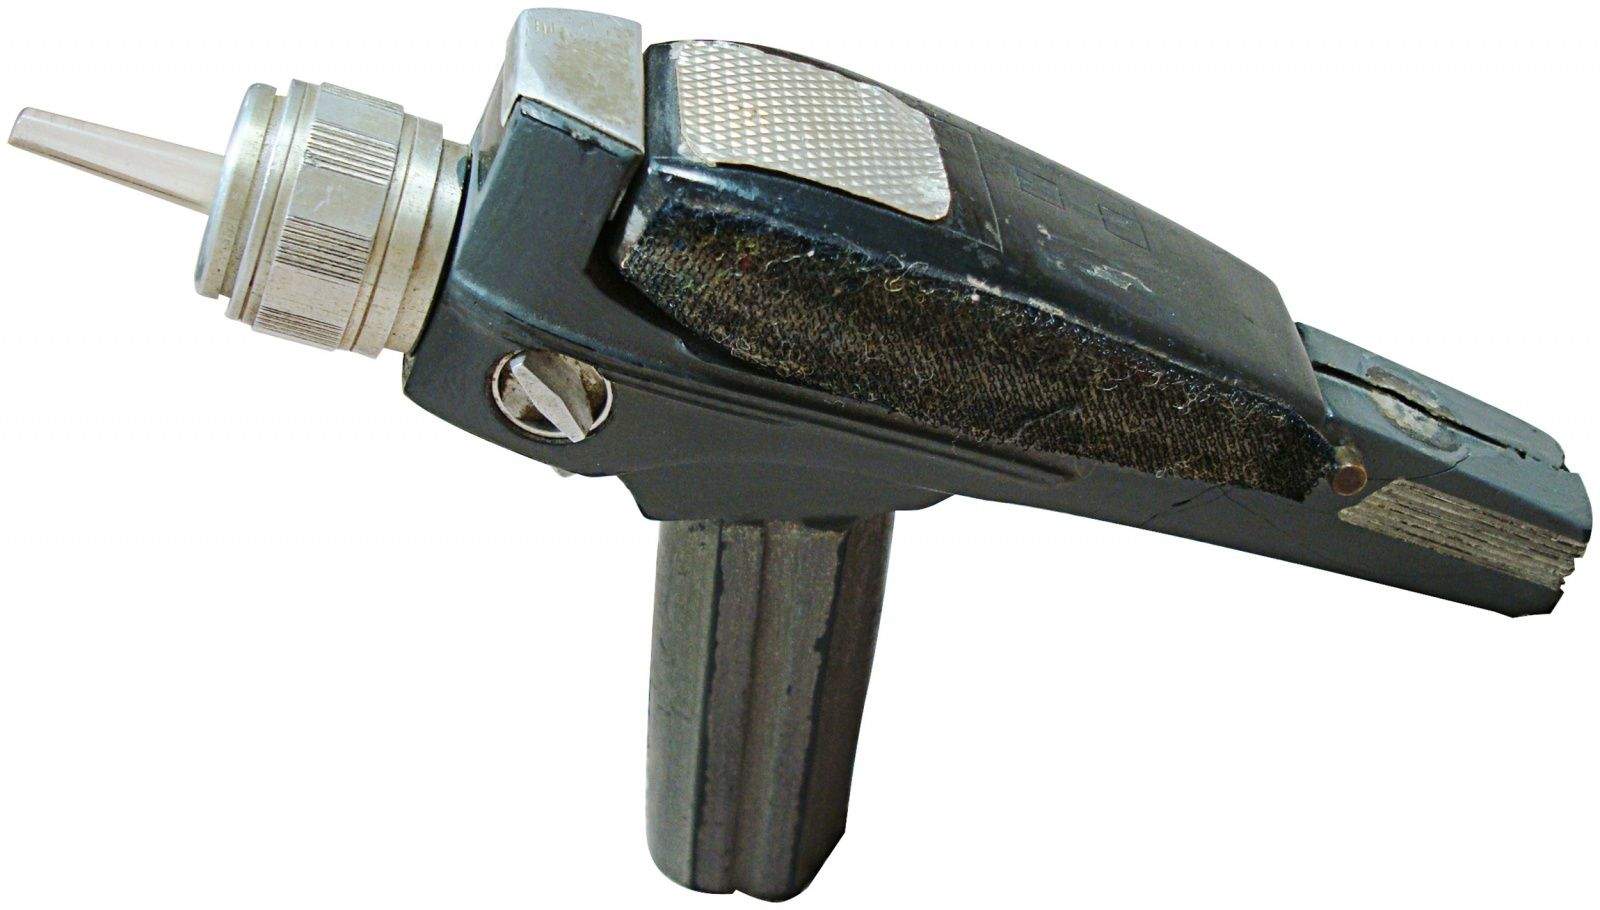 A phaser prop from the original Star Trek series will be auctioned off next month. Photo: Propworx